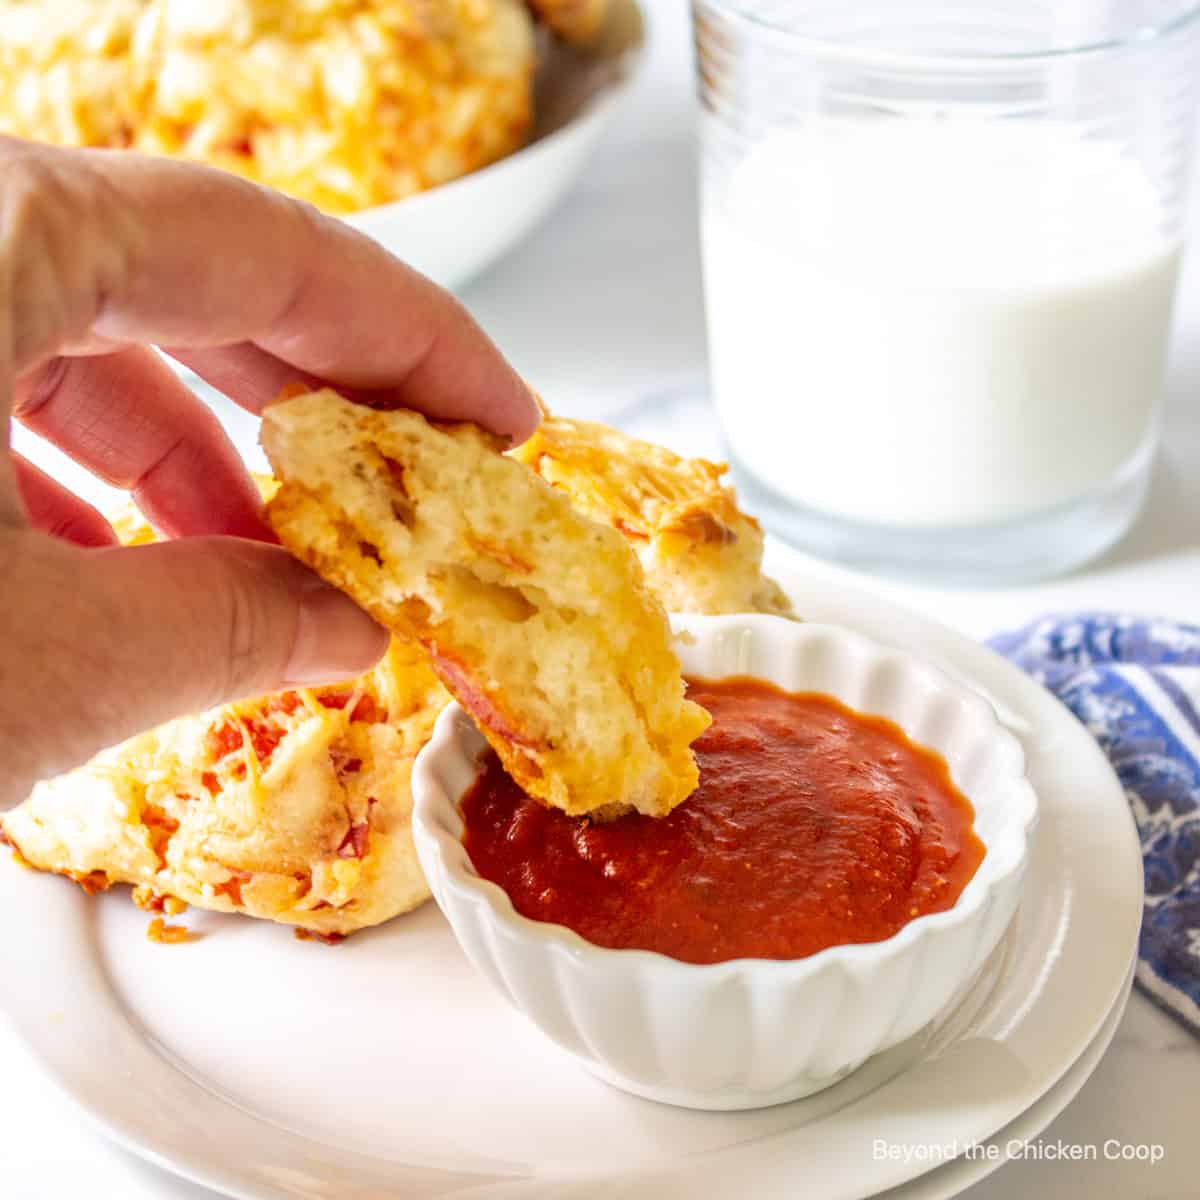 Pizza biscuits dipped into a tomato sauce.